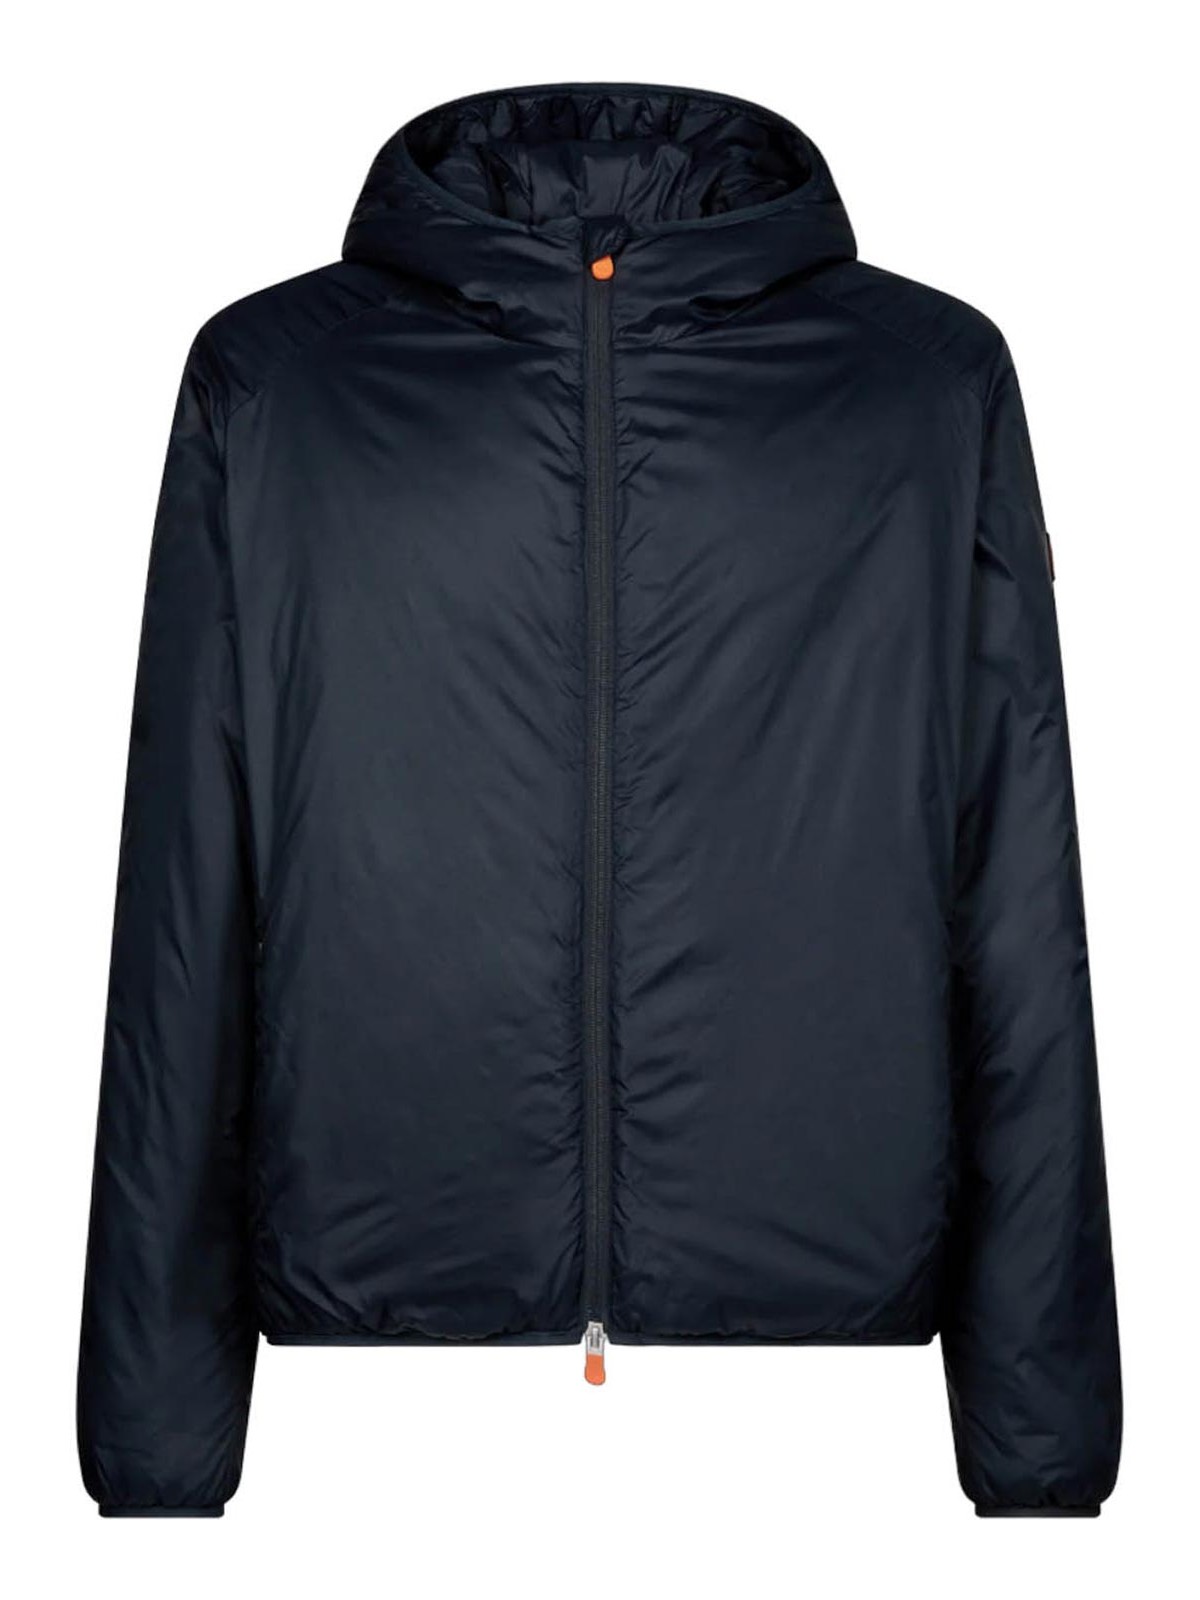 Padded jackets Save the Duck - The allium jacket - D31445MGIRE1790010